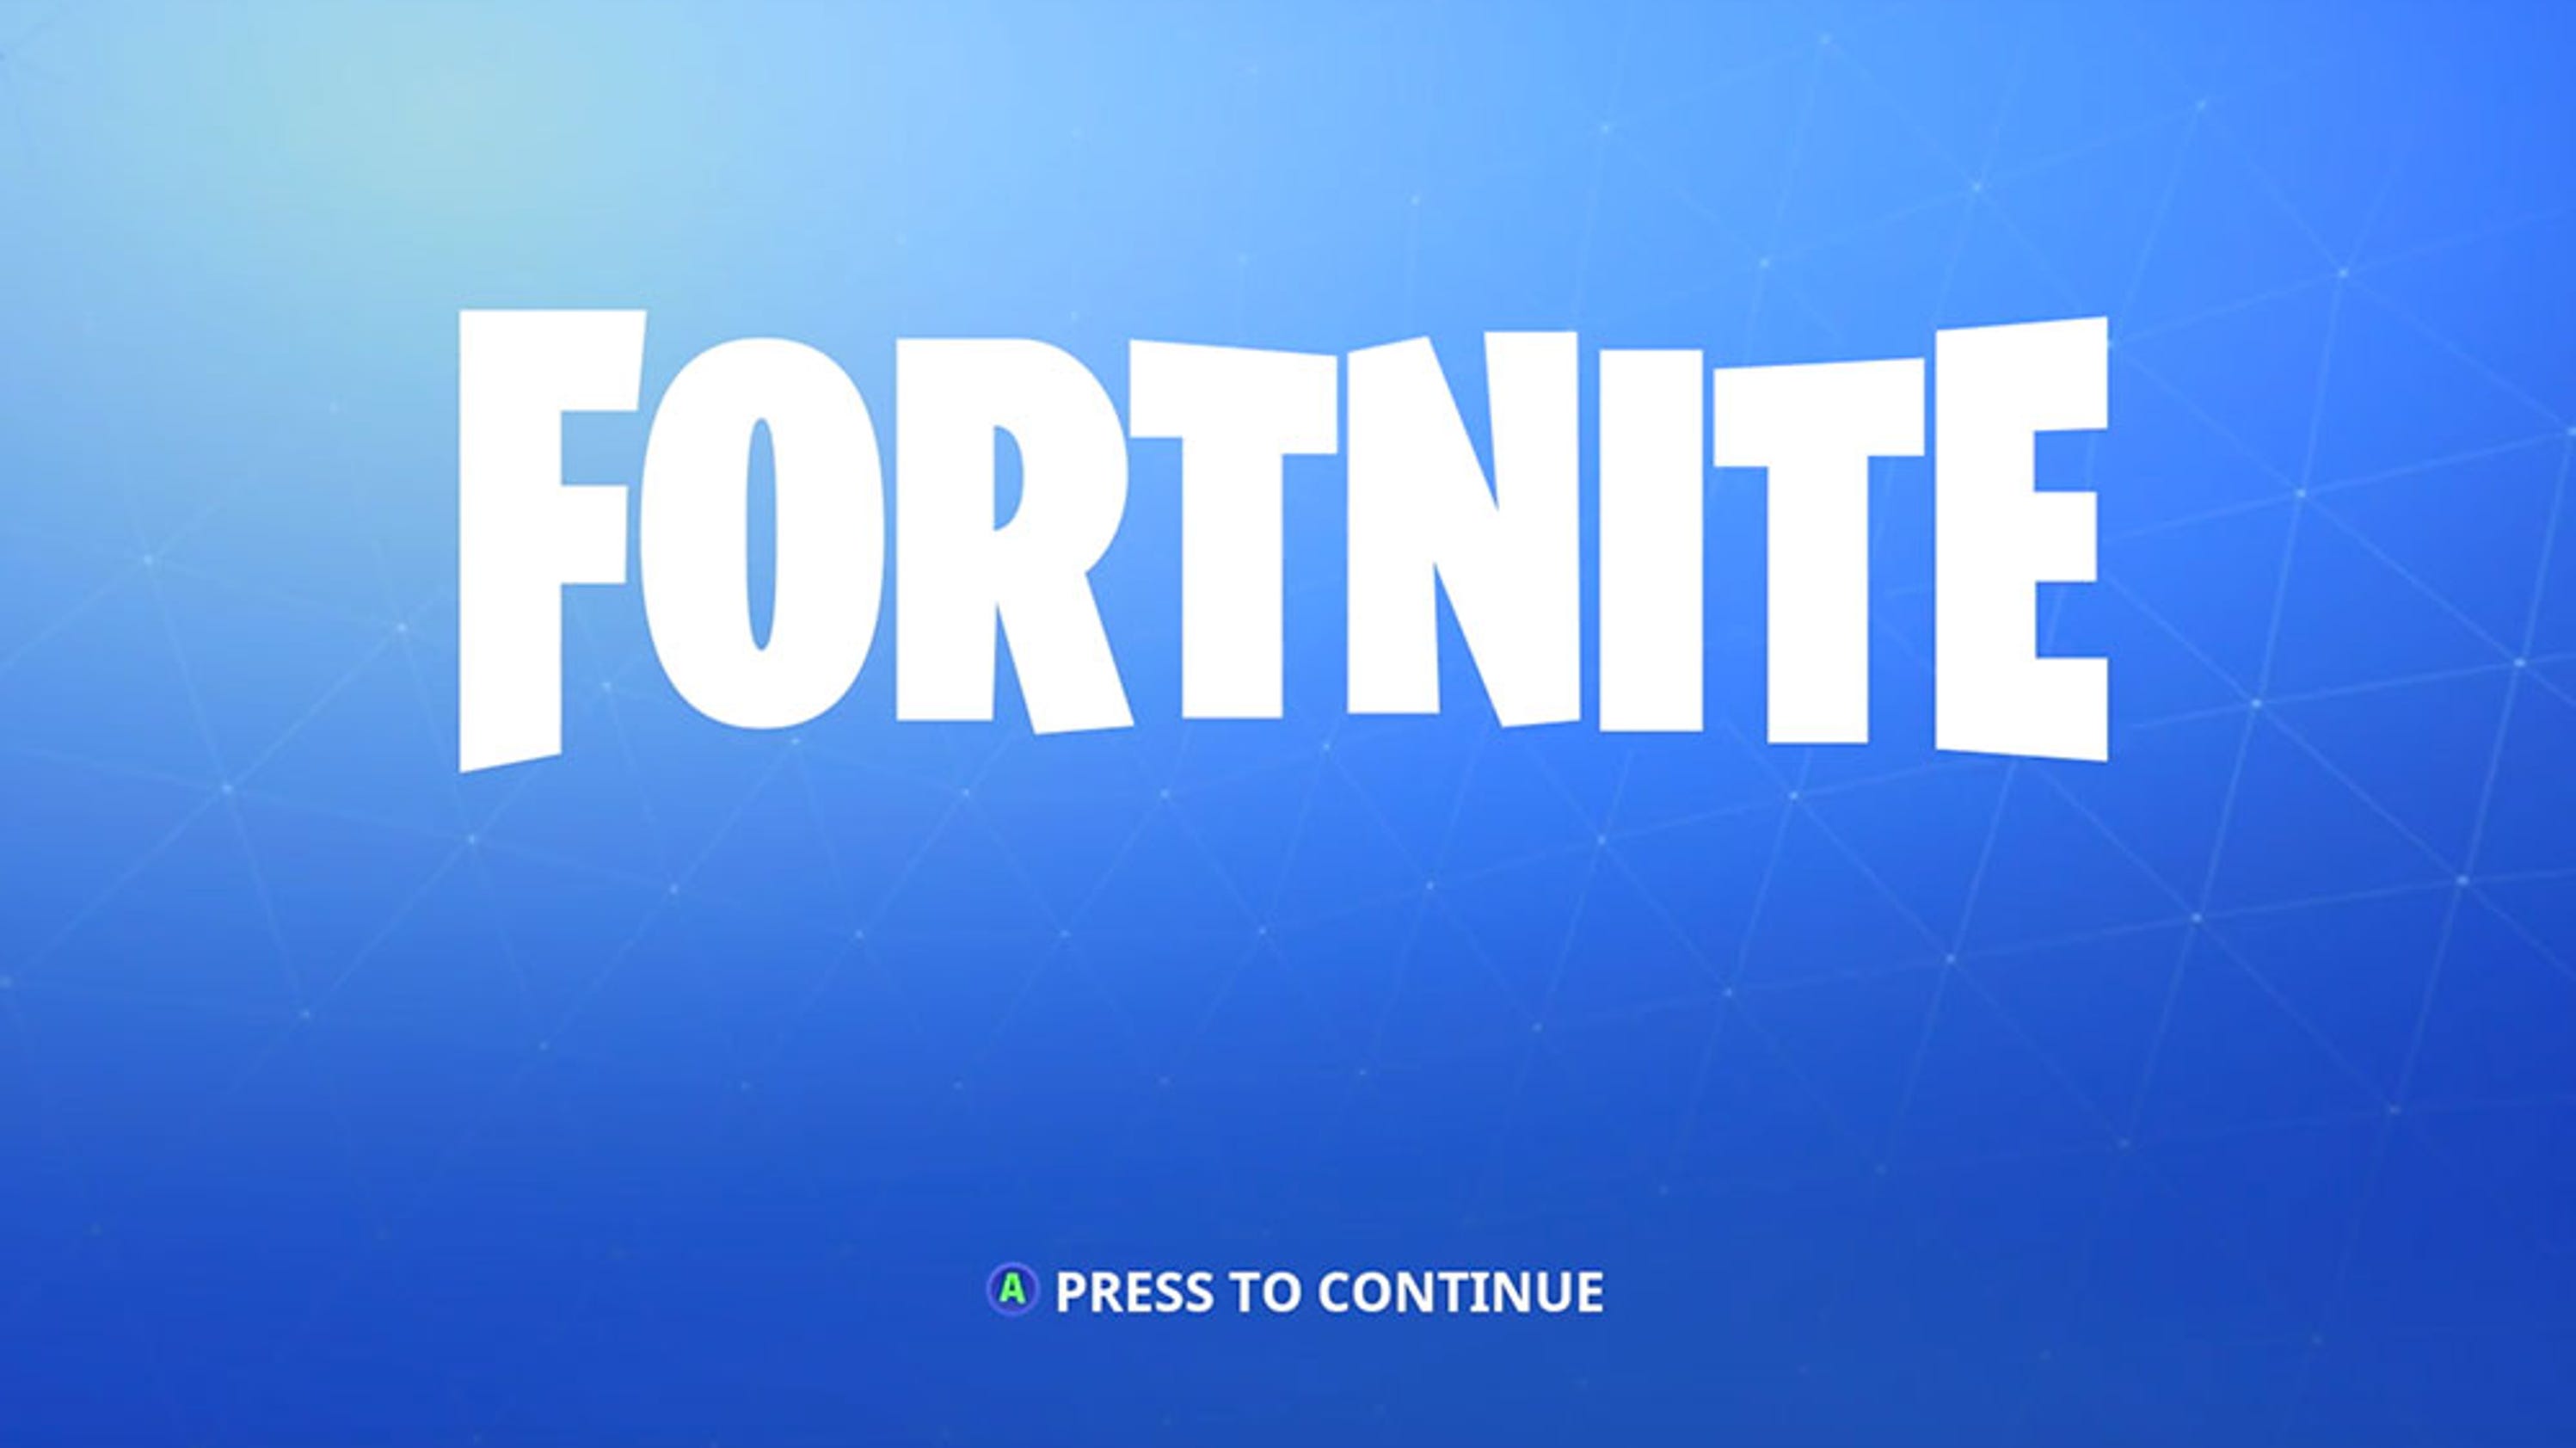 Fortnite is taking over the sports world